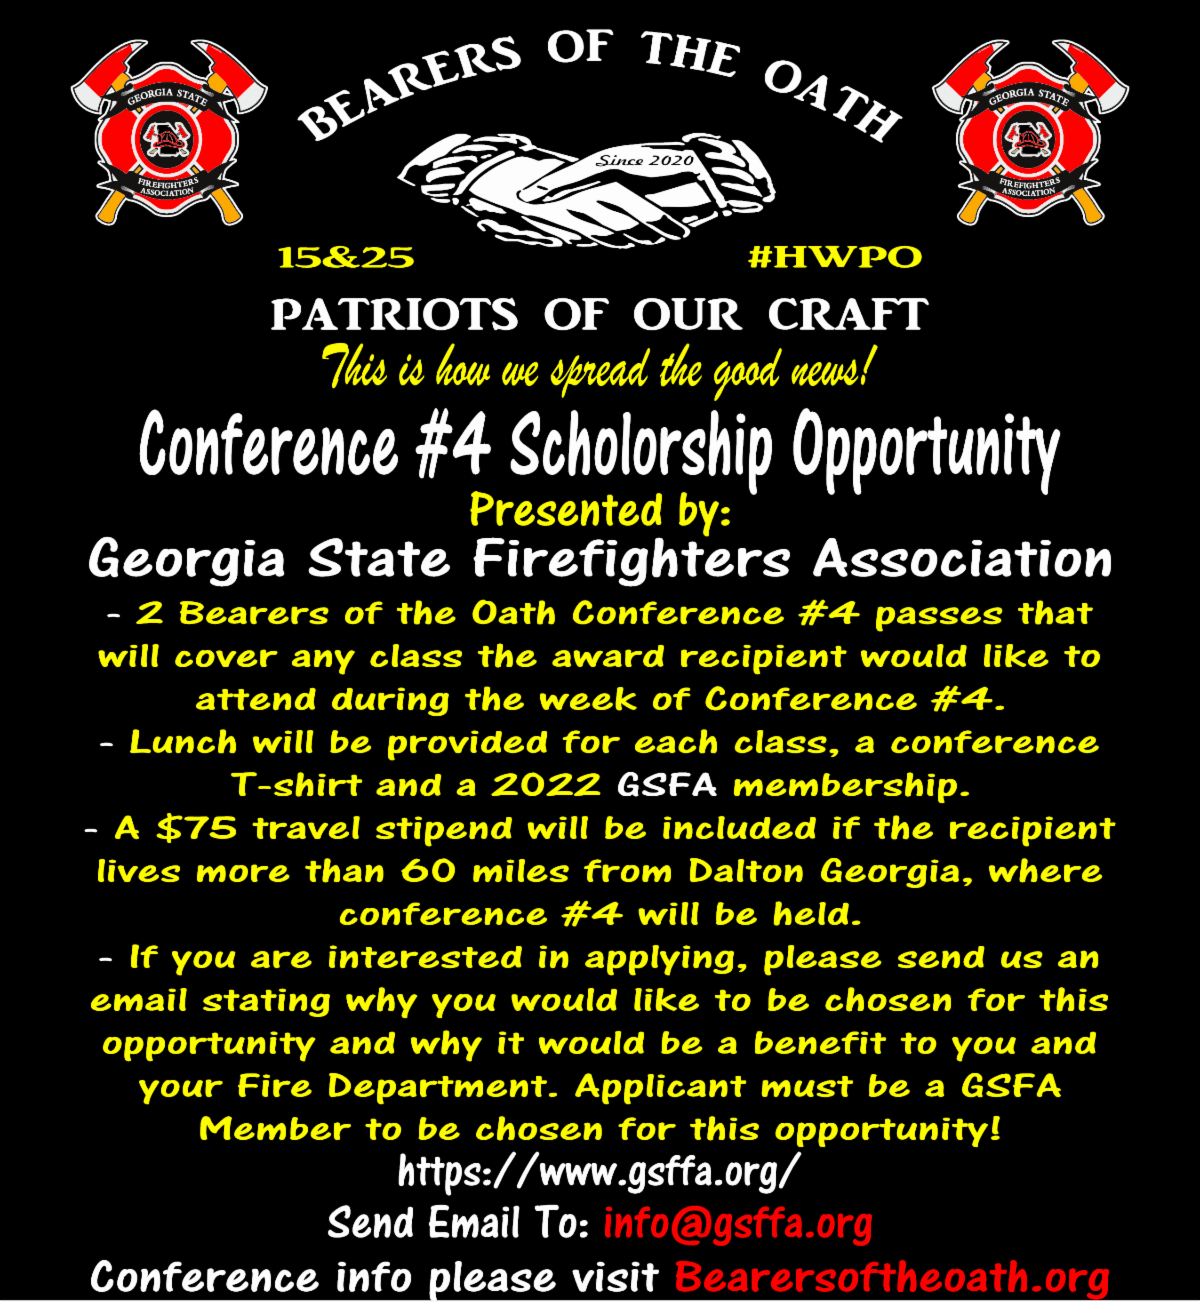 Conference #4 Scholarship Opportunity